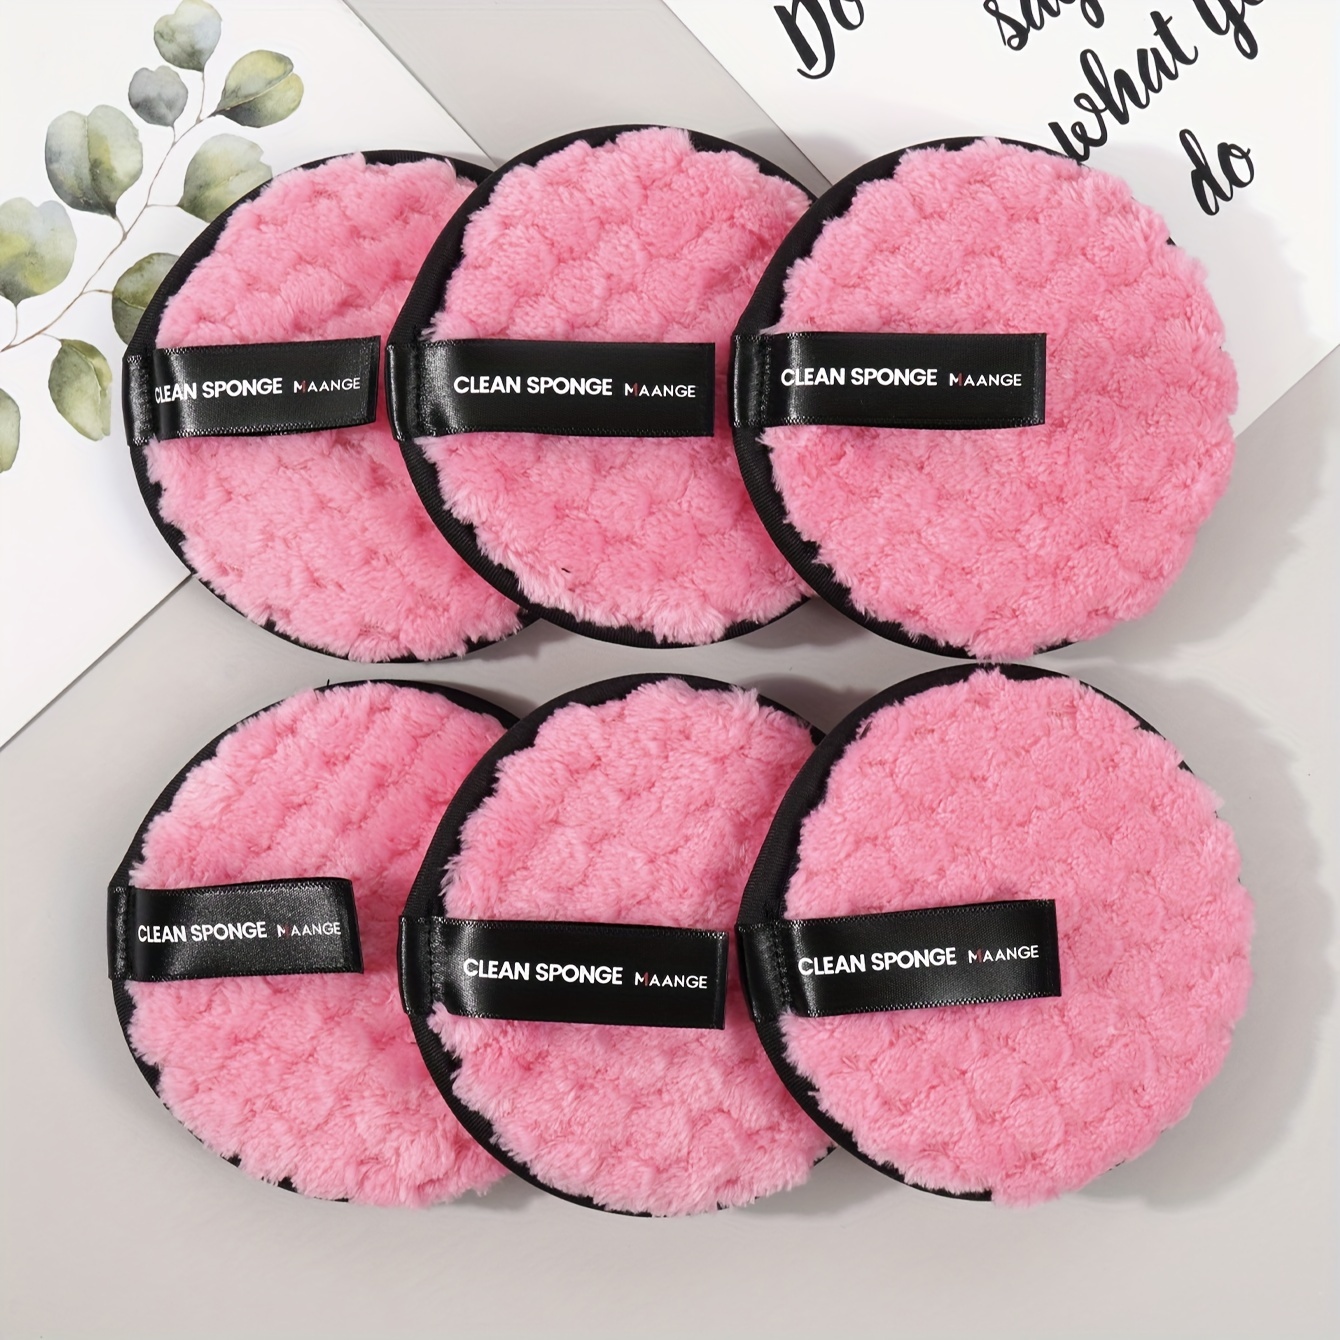 

6-pack Facial Cleansing Puffs, Soft Non-irritating Makeup Remover Tools, Reusable & Machine Washable, Gentle Exfoliation Pads For Face Care